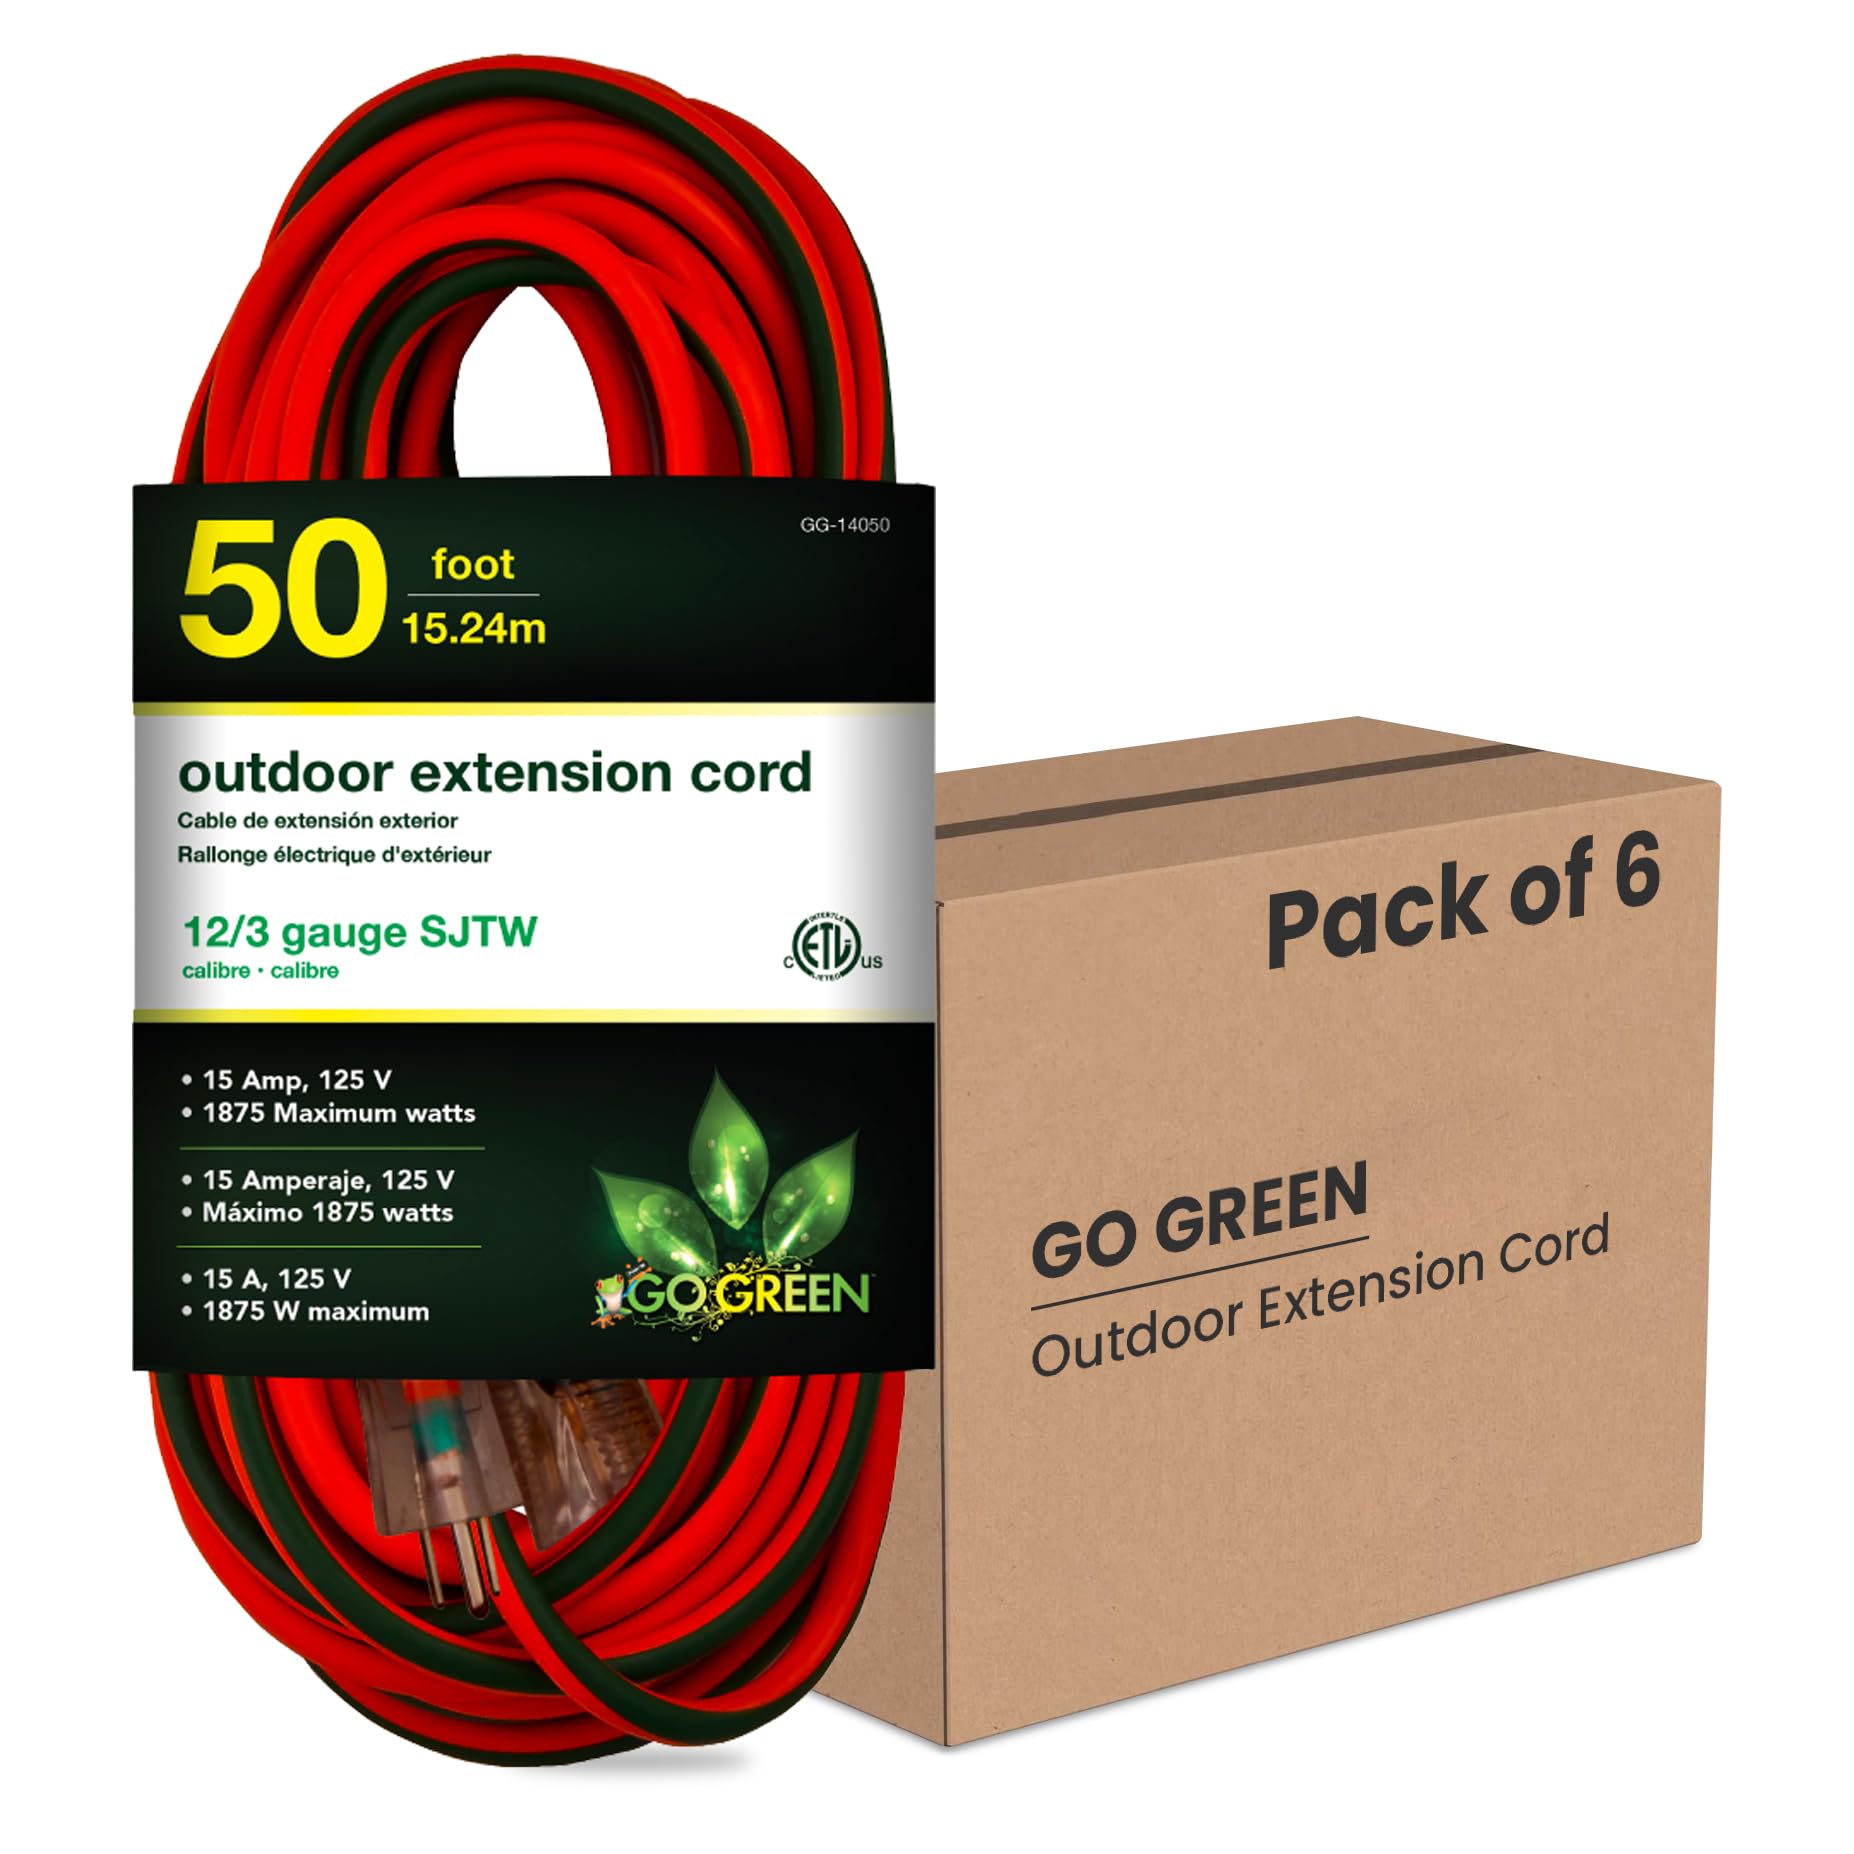 6-Pack of 50ft Go Green Power 12/3 SJTW Outdoor Extension Cords $76.50 + free s/h